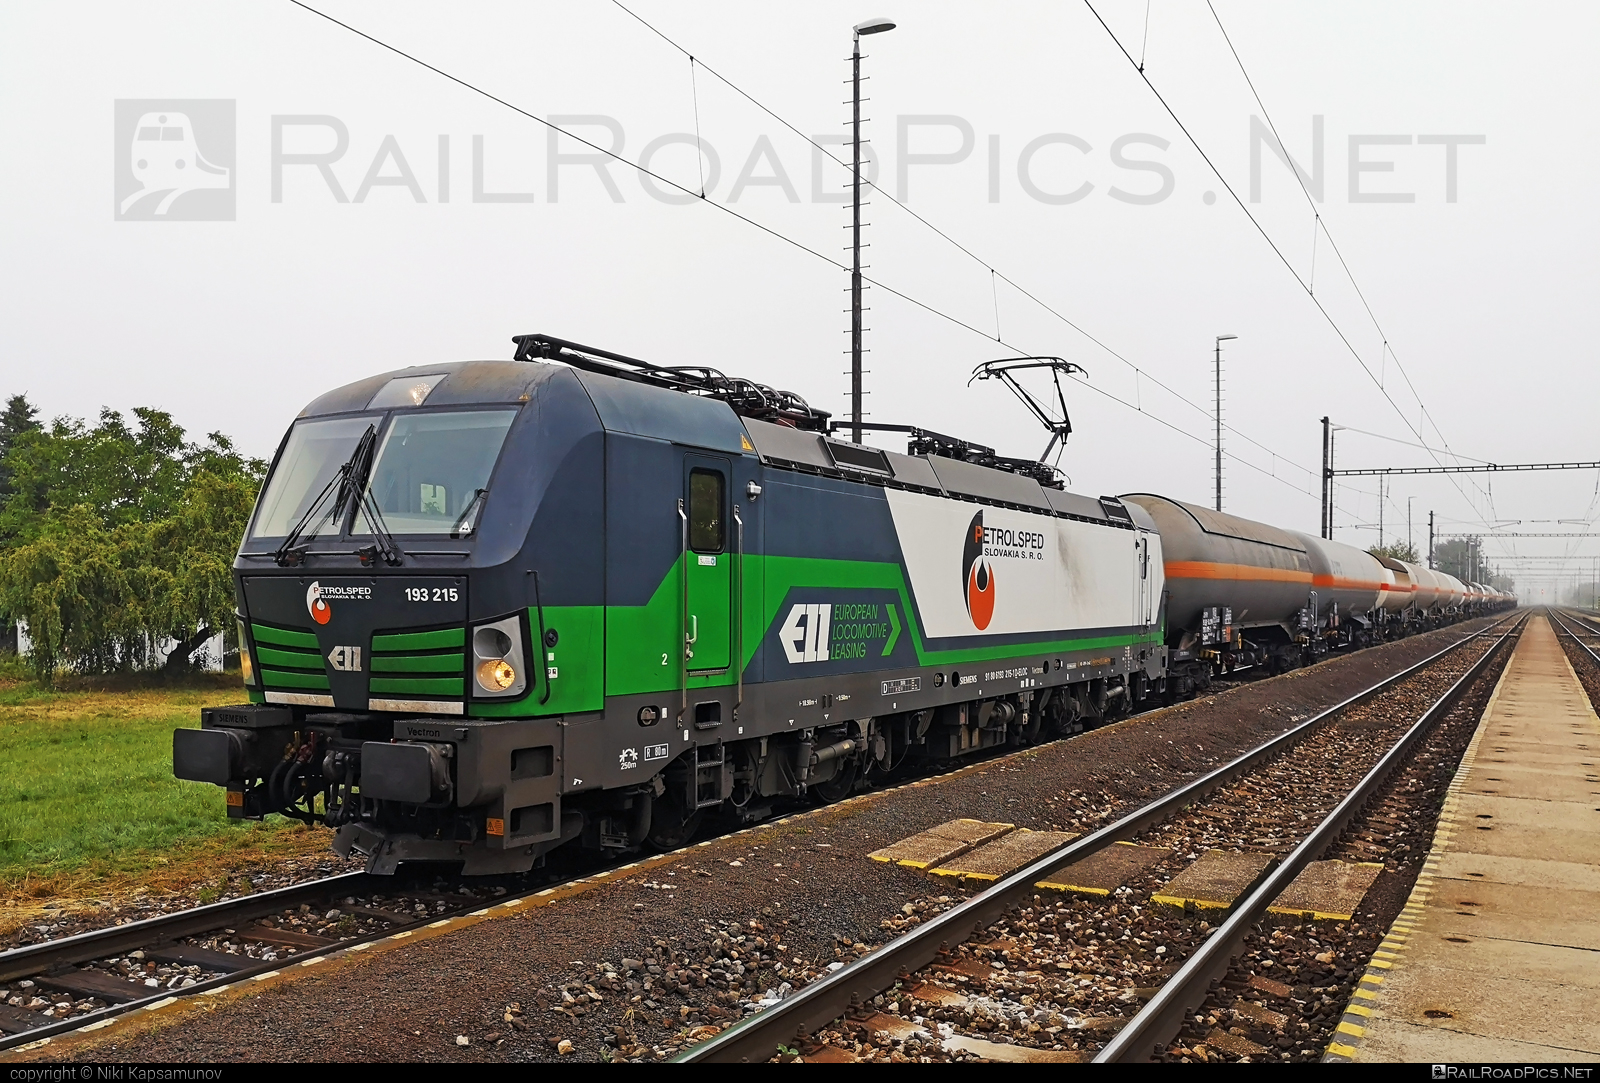 Siemens Vectron MS - 193 215 operated by PETROLSPED Slovakia s.r.o. #ell #ellgermany #eloc #europeanlocomotiveleasing #petrolsped #siemens #siemensvectron #siemensvectronms #vectron #vectronms